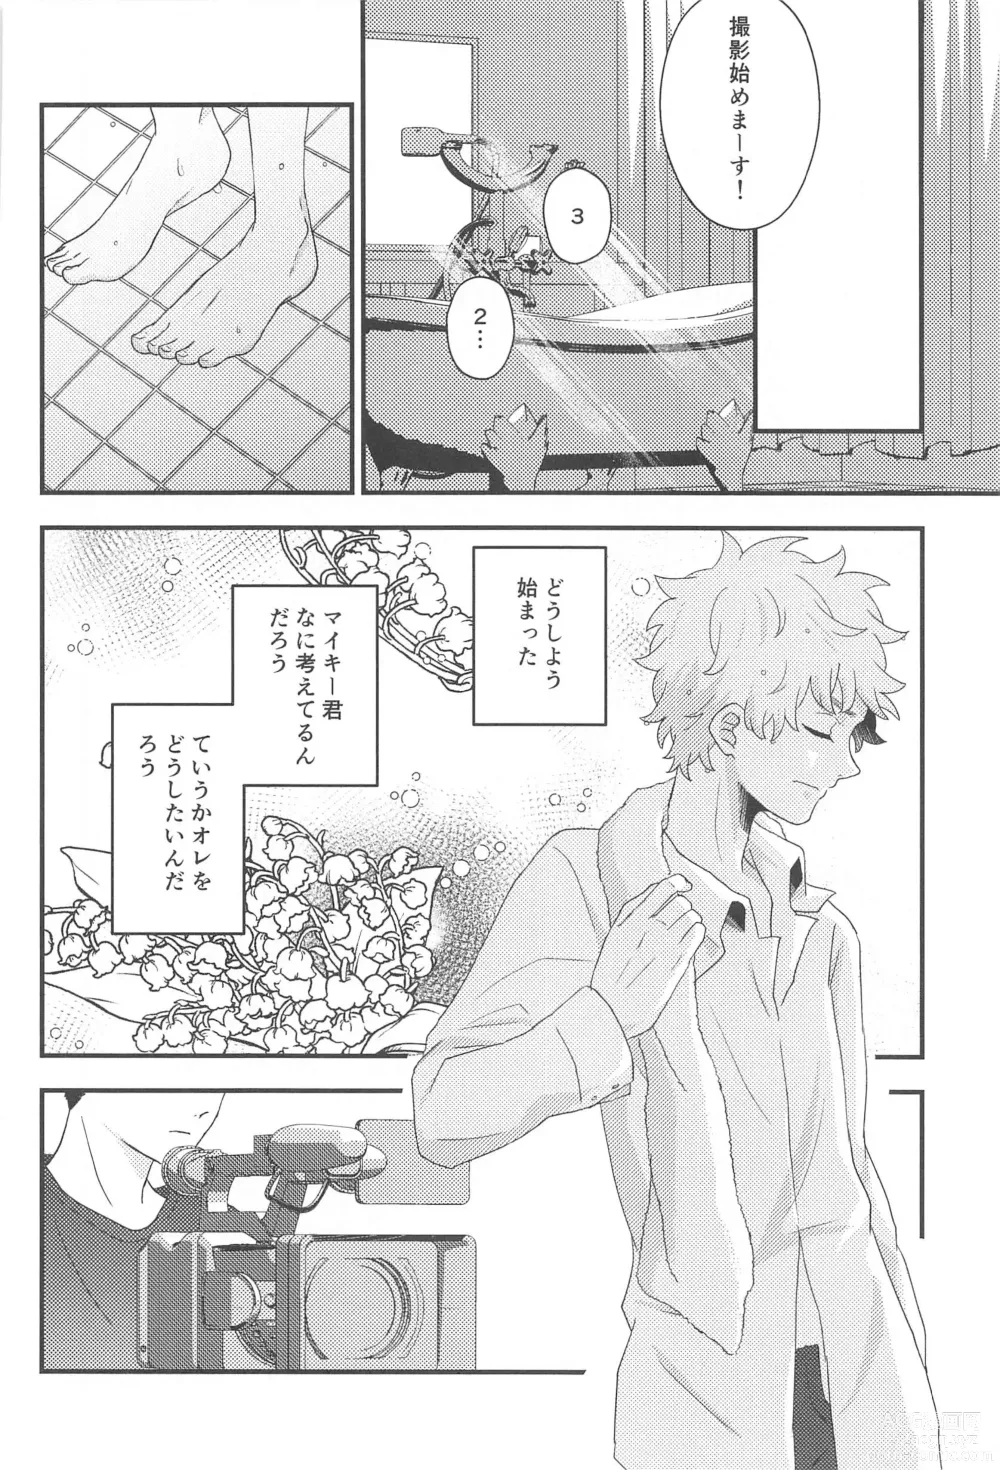 Page 27 of doujinshi STAY LUCKY